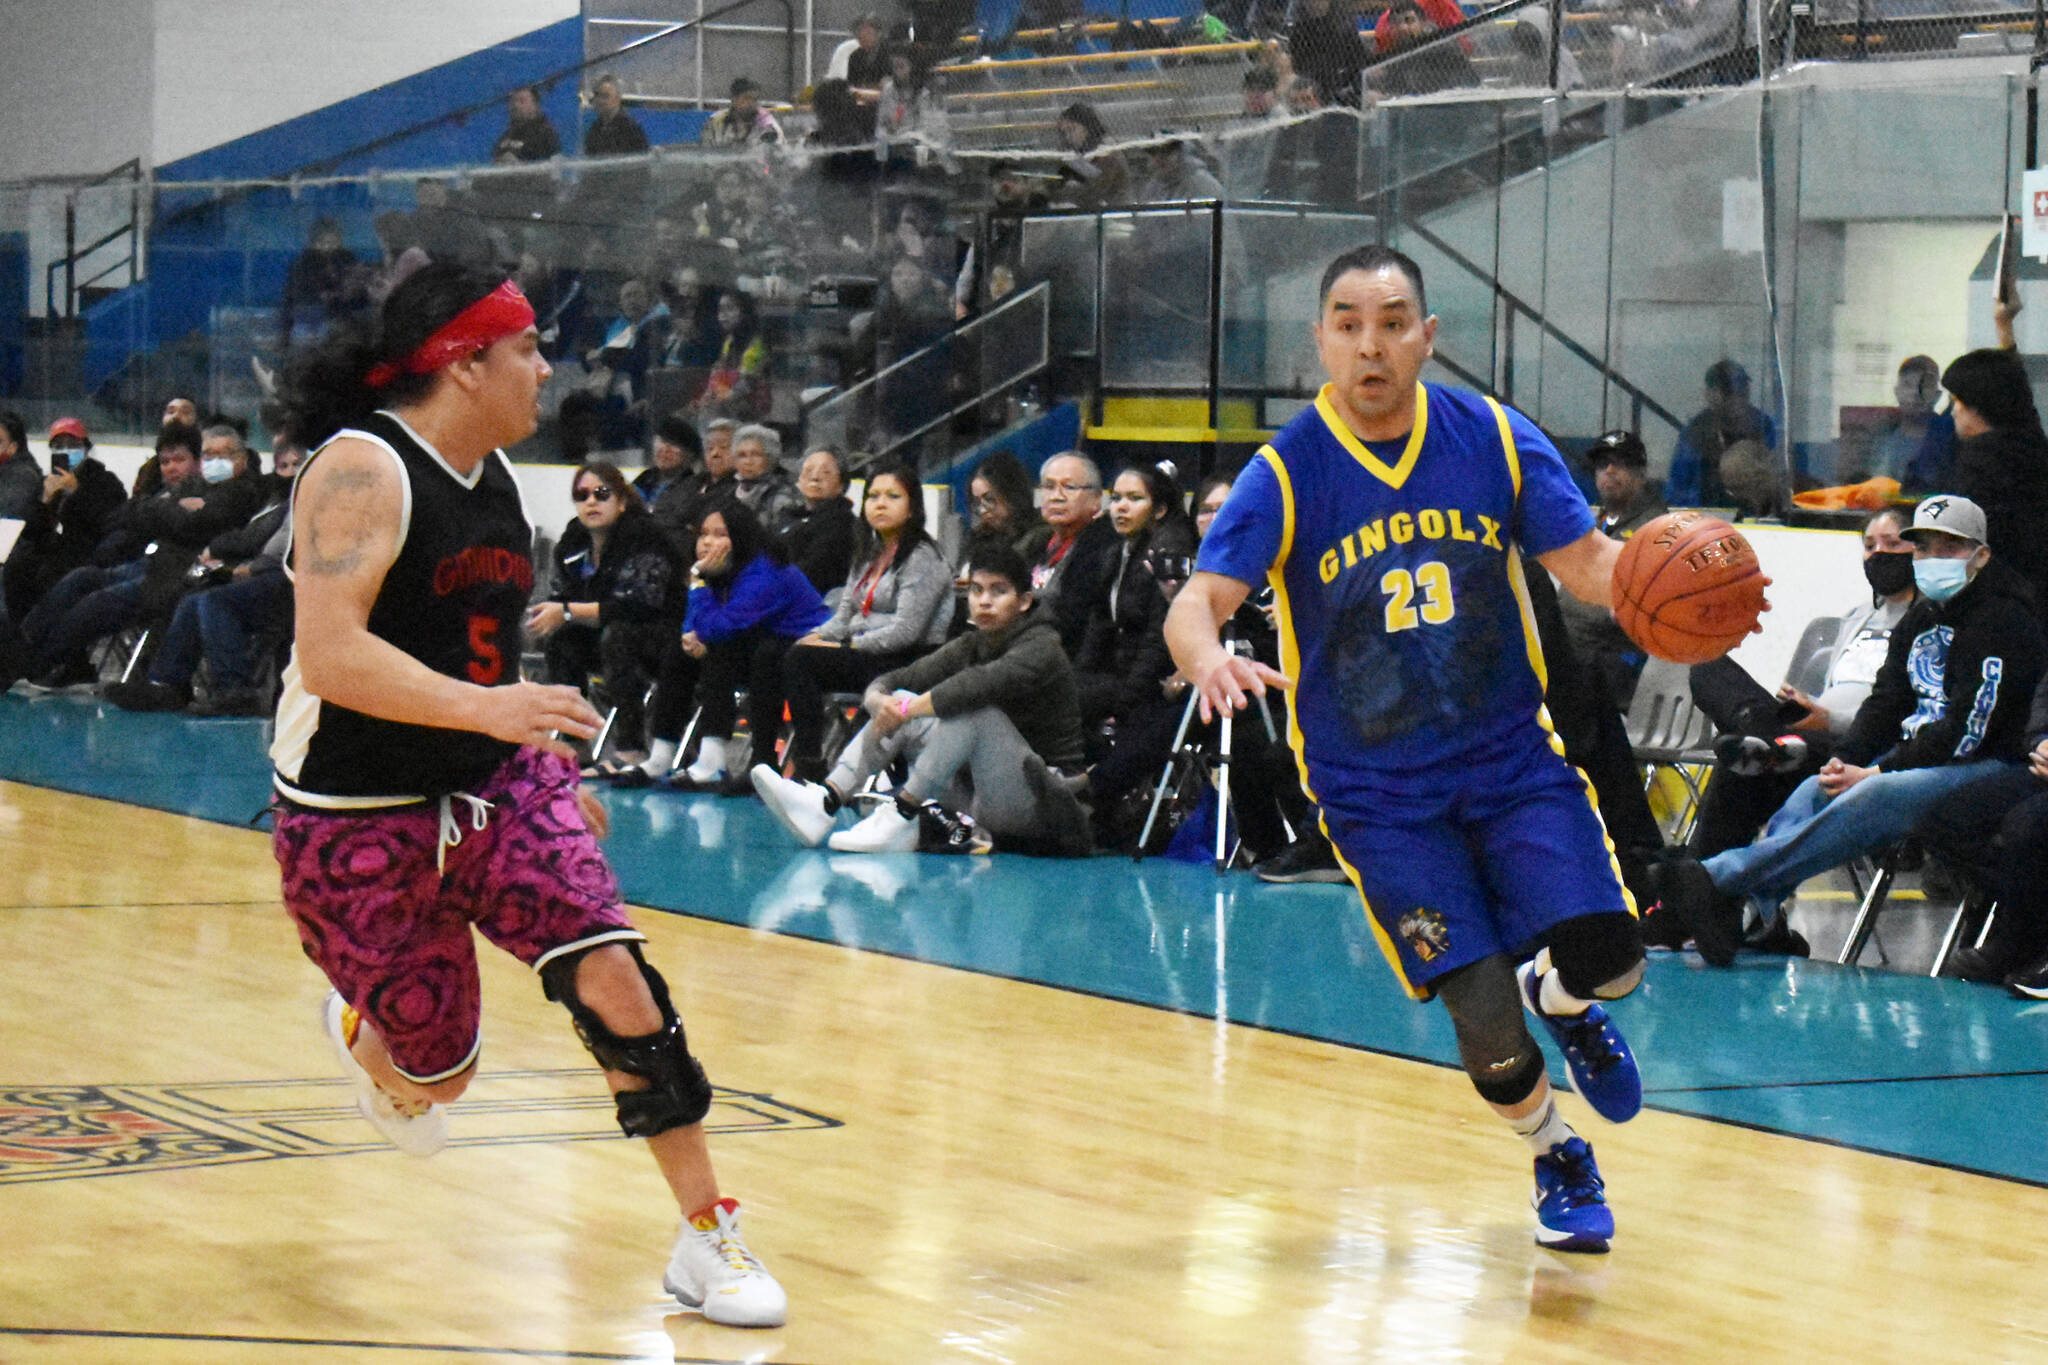 Kincolith’s Vern Stephens, right, drives the baseline against Richard Wolff of New Aiyansh during Masters Division action at the All Native Basketball Tournament in Prince Rupert on Day 3 (April 5). (Thom Barker photo)